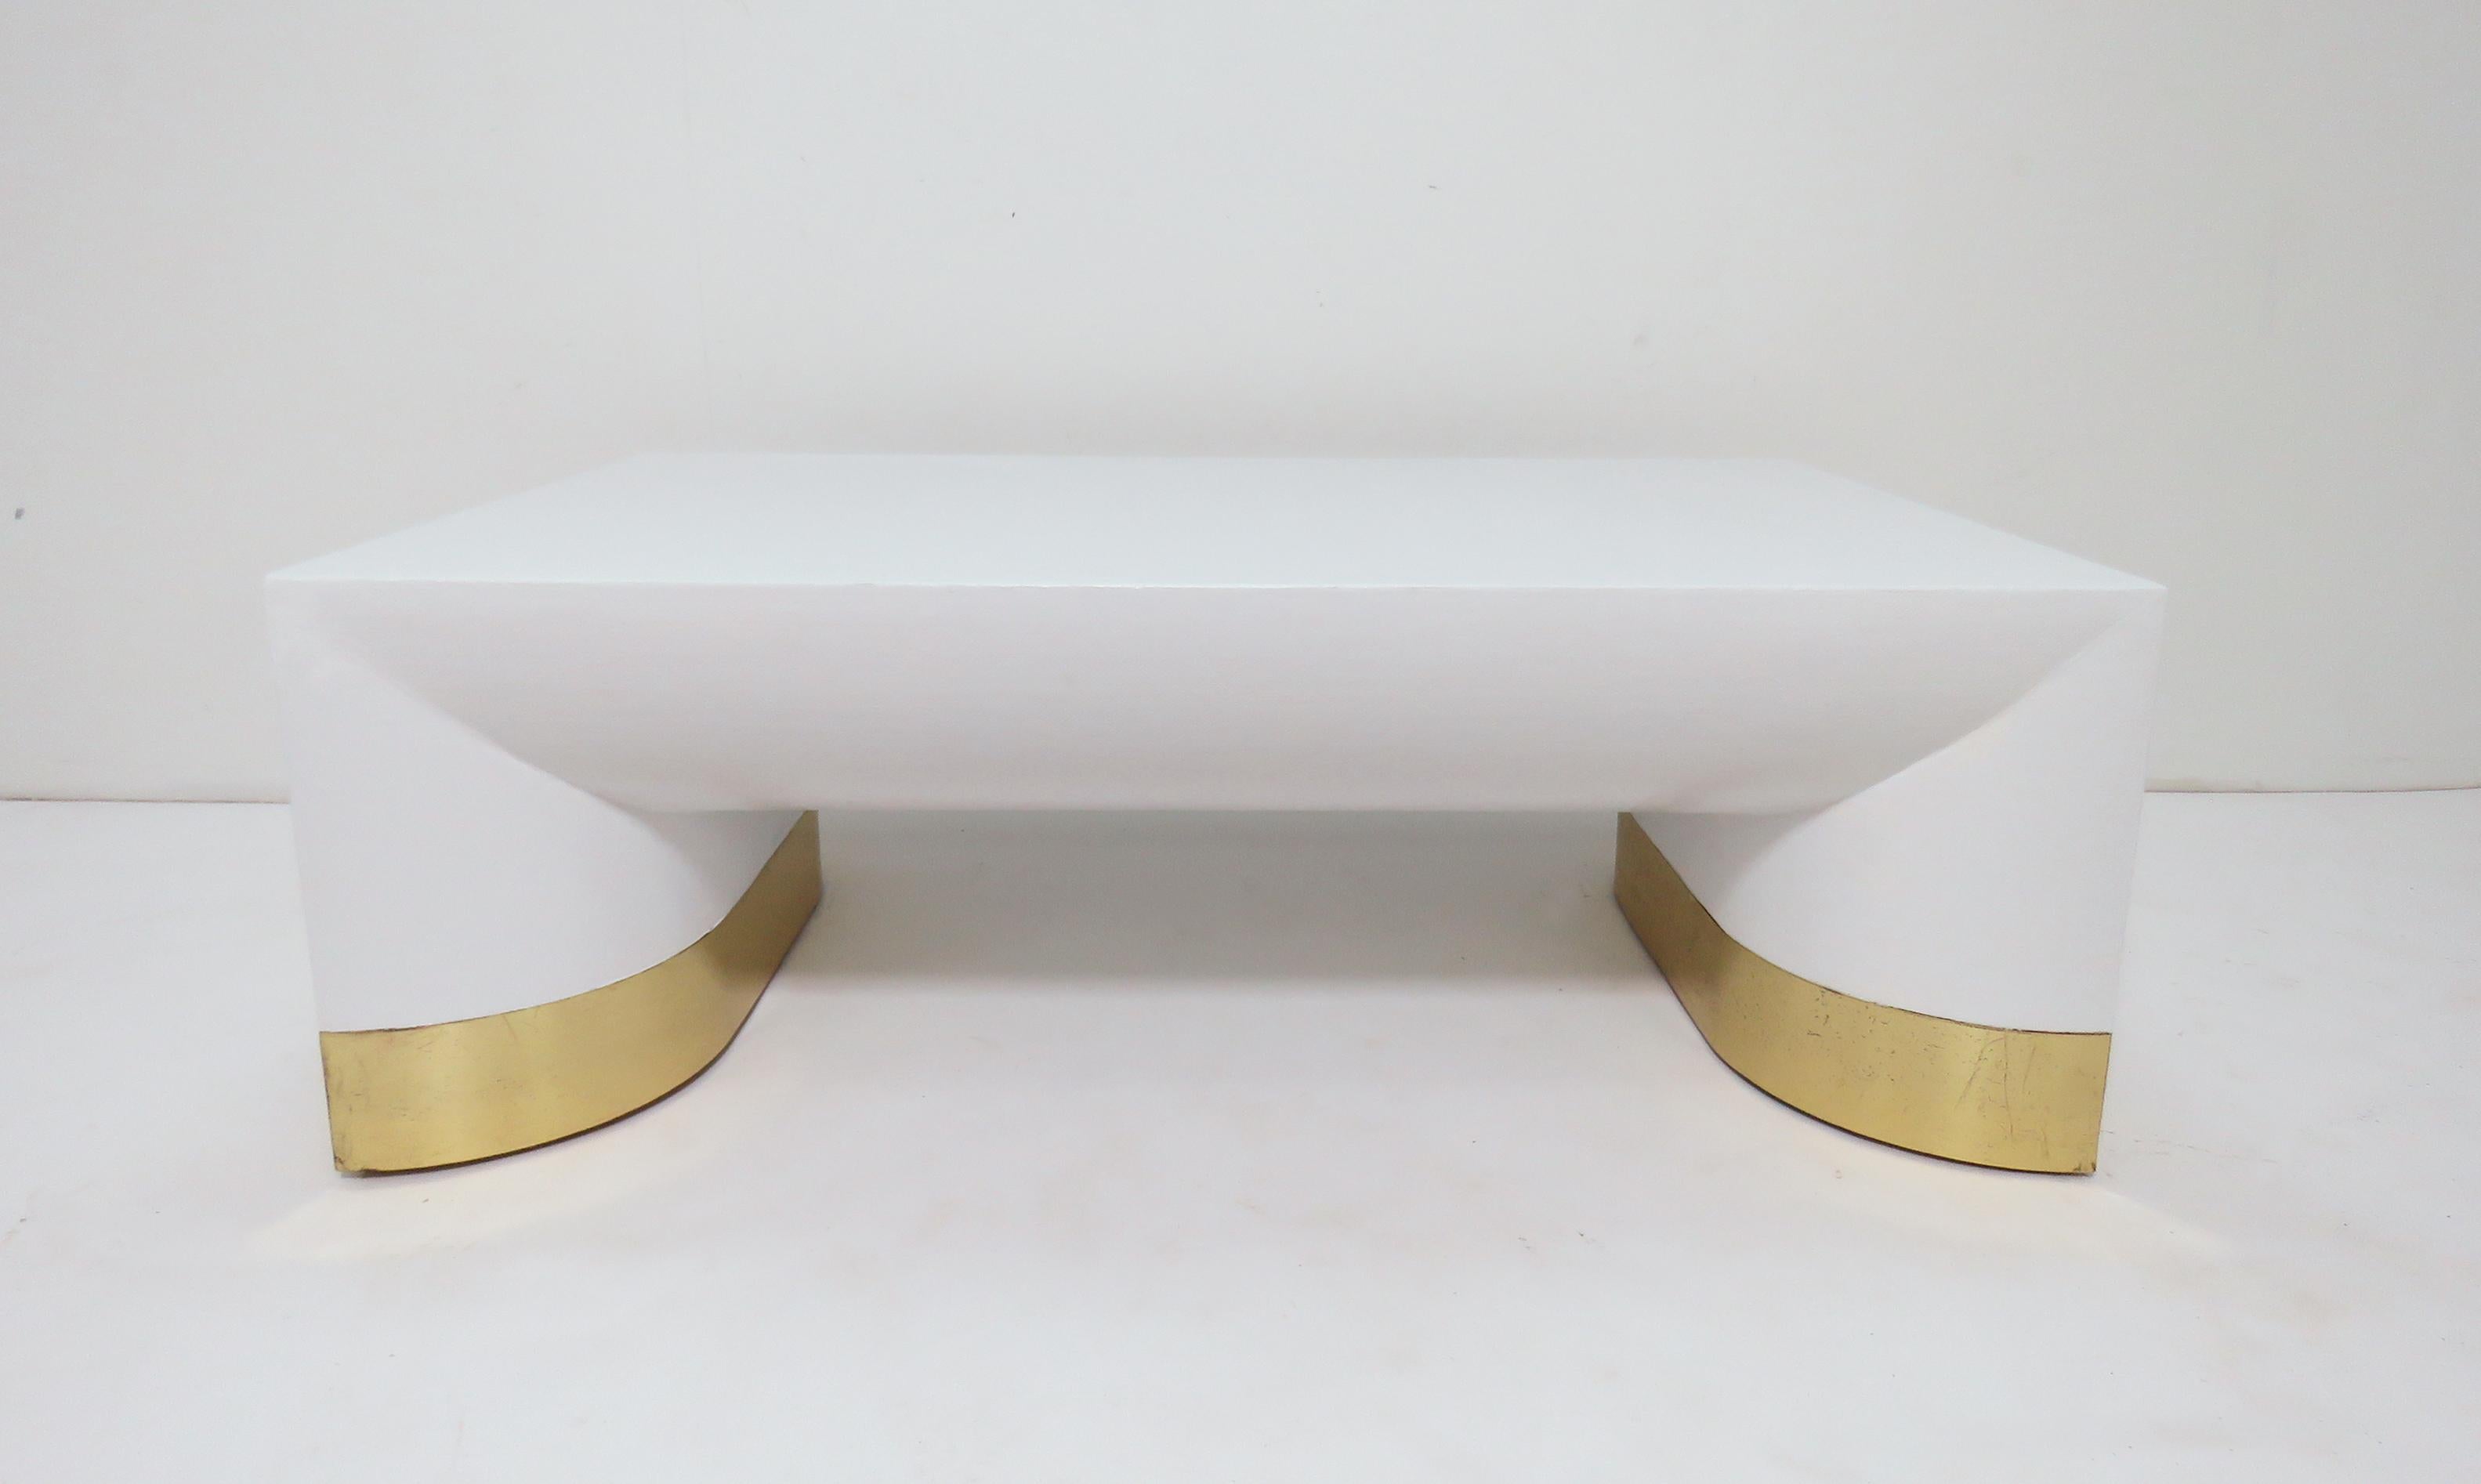 Large coffee table by Jay Spectre for Century Furniture in lacquered linen with brass toned metal accents at the legs, in the manner of Karl Springer.